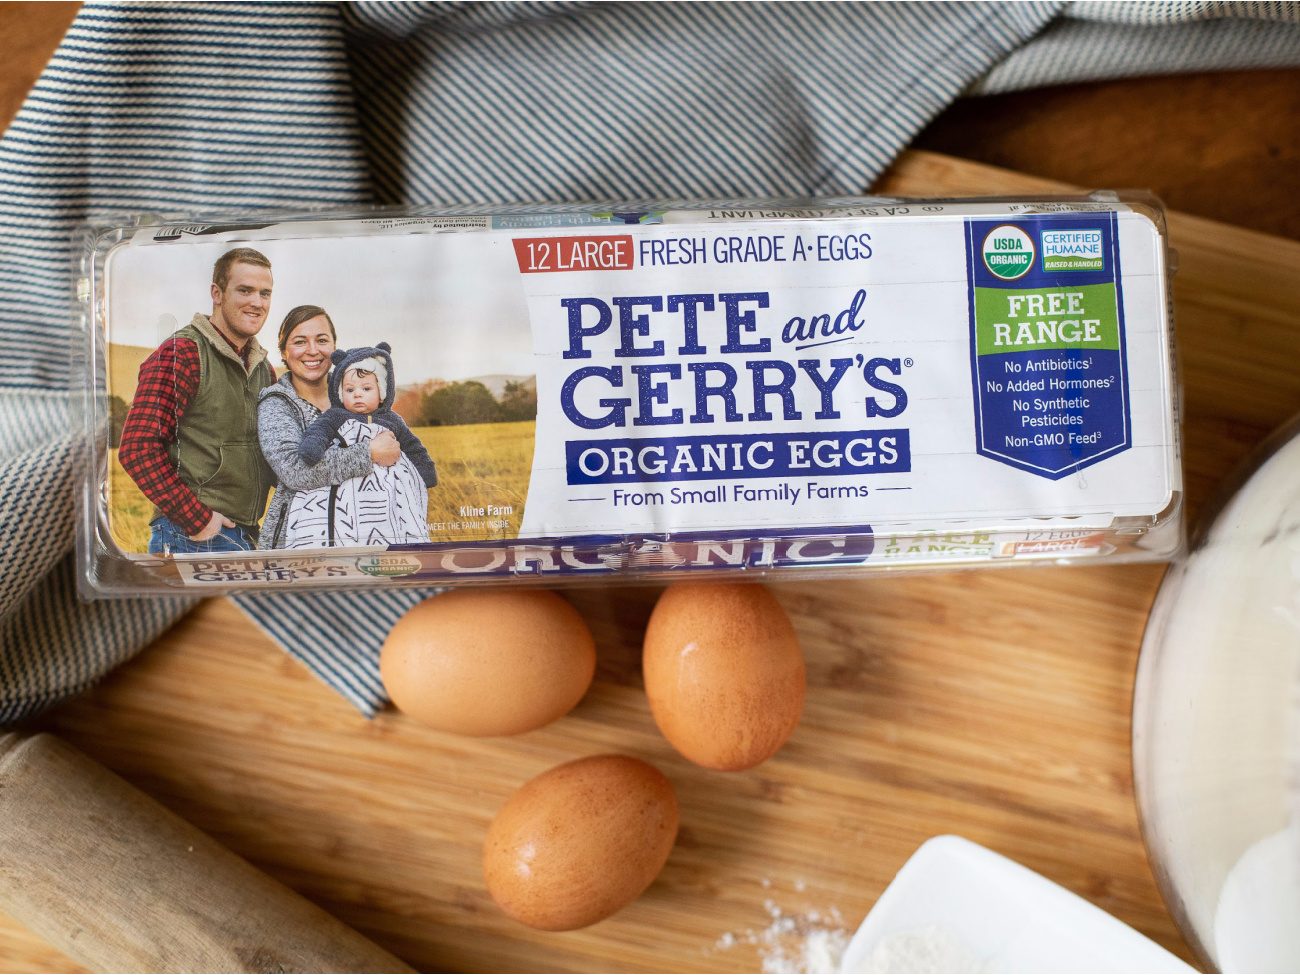 Pete And Gerry’s Organic Eggs As Low As $2.99 At Kroger (Regular Price $6.99)